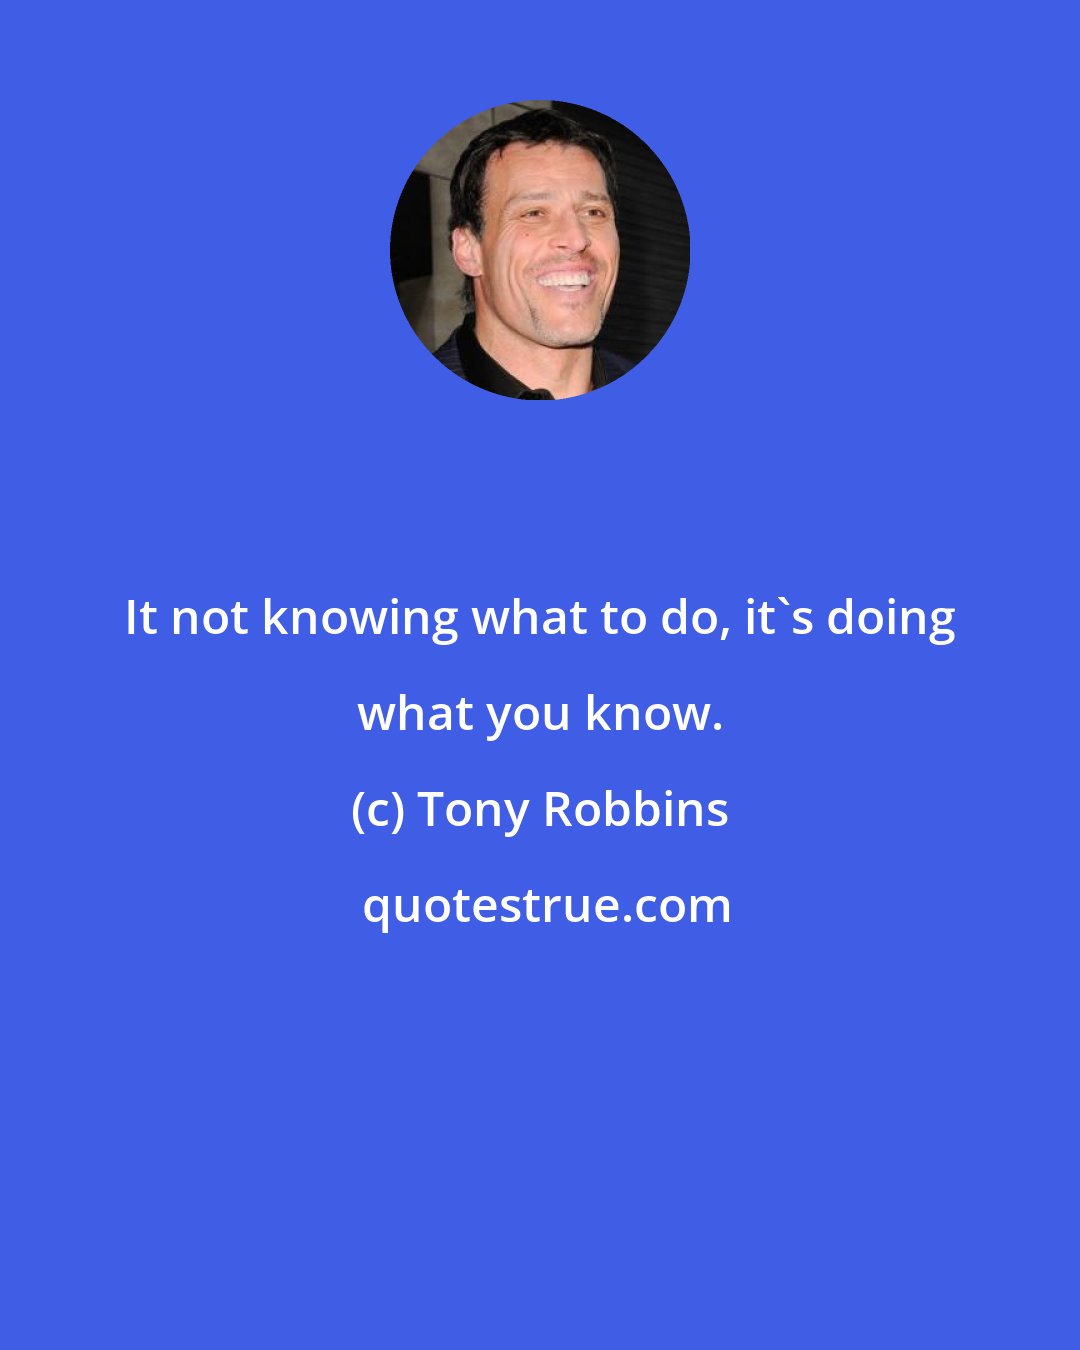 Tony Robbins: It not knowing what to do, it's doing what you know.